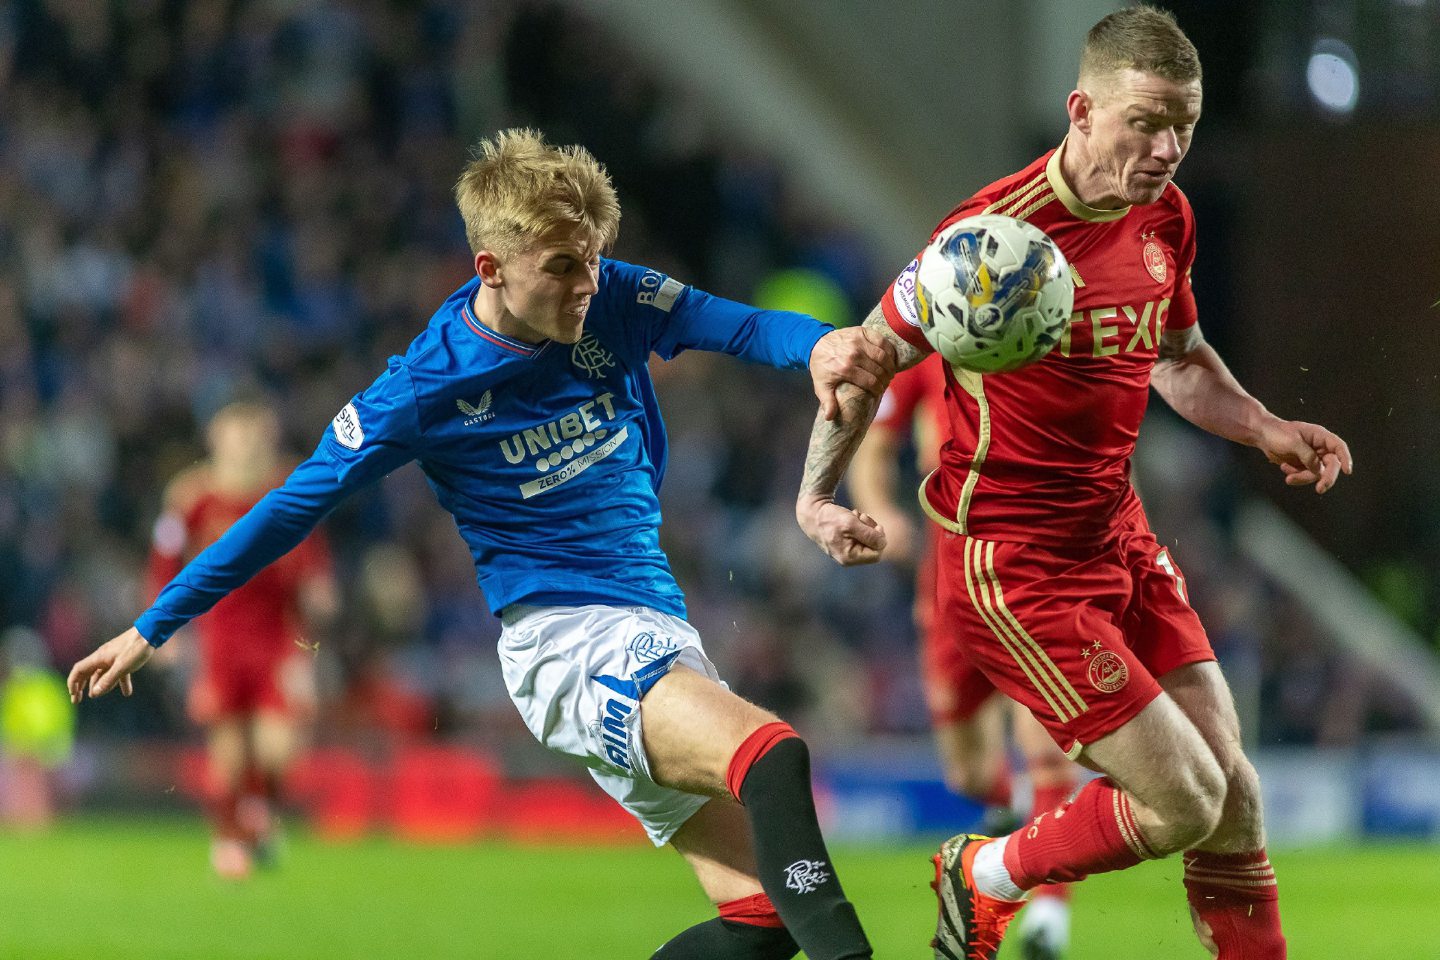 Jonny Hayes tussles with Rangers' Ross McCausland in Neil Warnock's first game in charge. Image: Shutterstock.